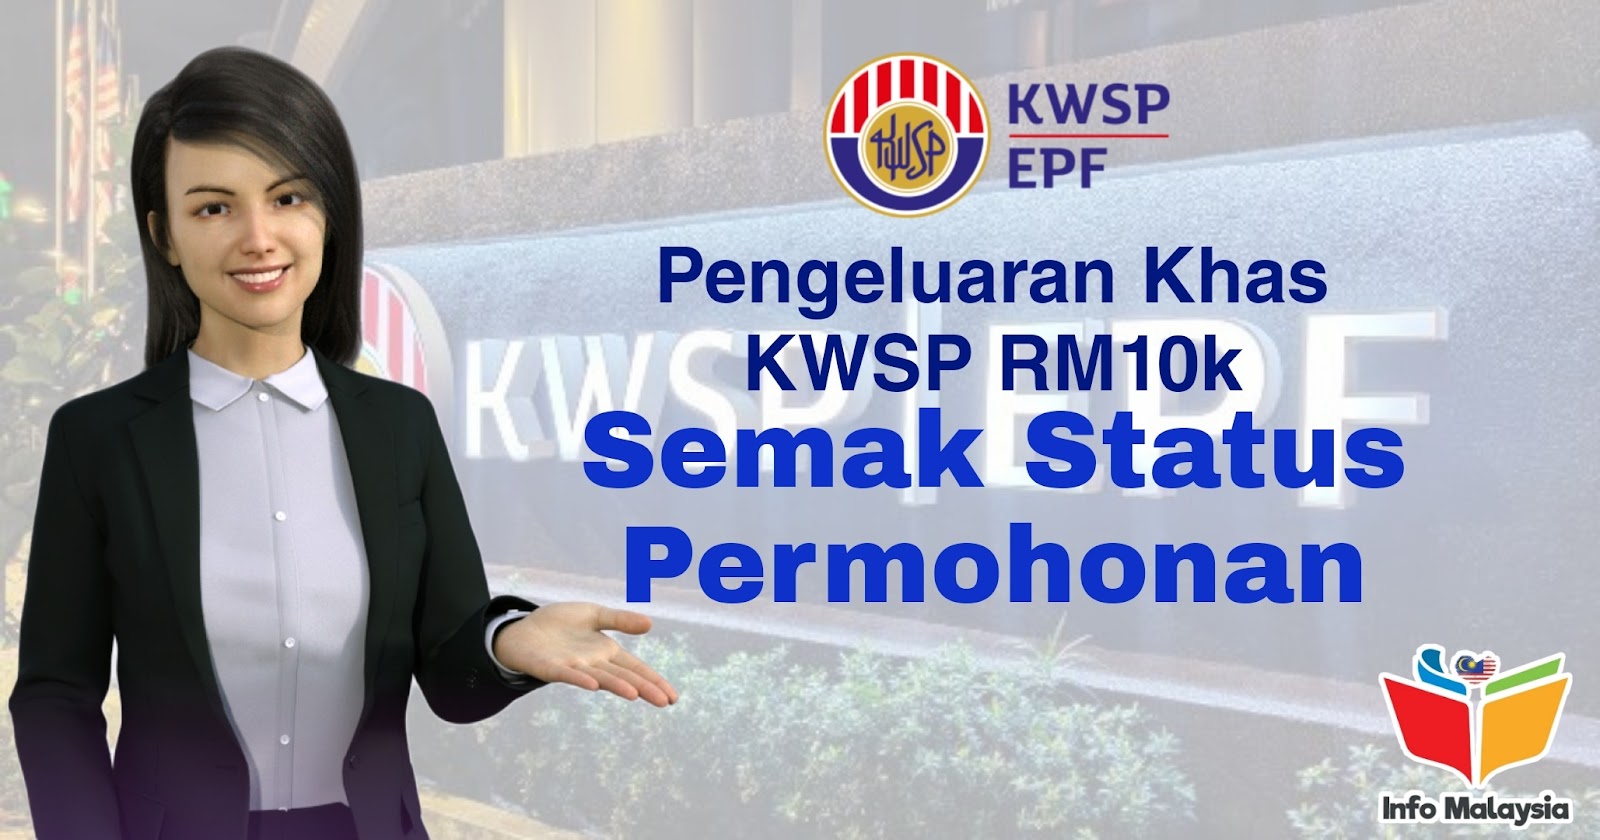 10k check kwsp How To